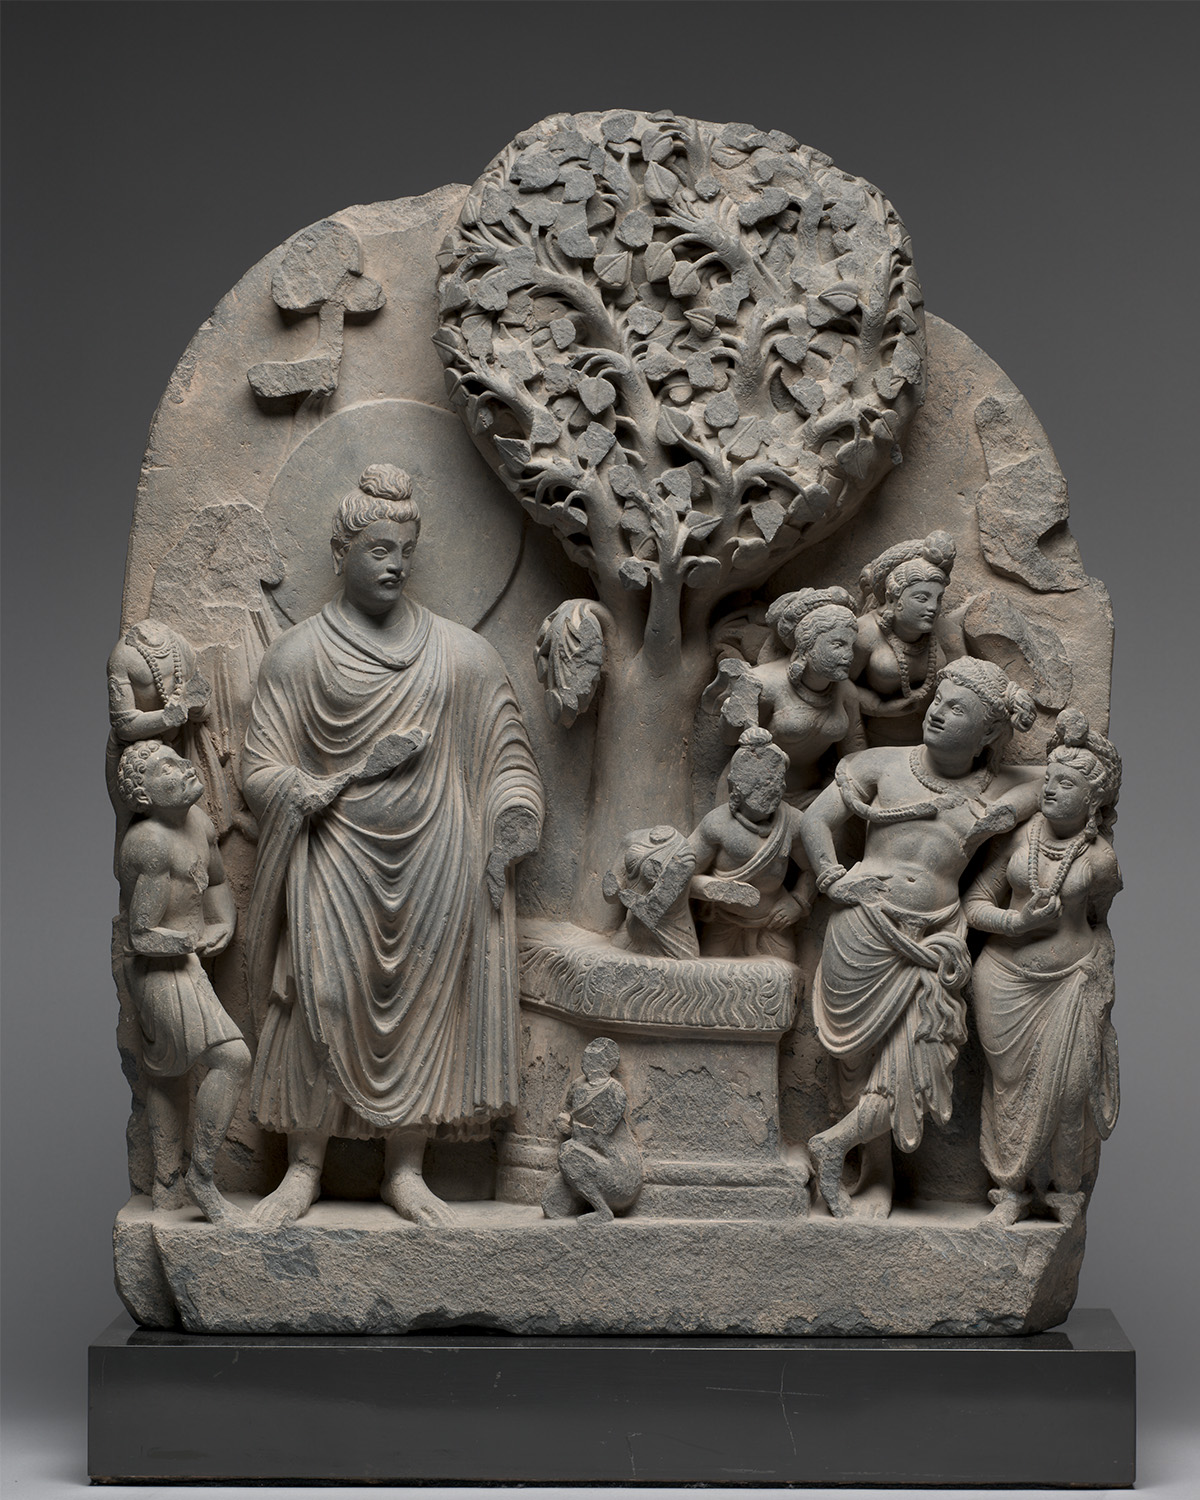 A stone relief of the Bodhi Tree with Siddhartha on the left and flanked by villagers, and the earth goddess at the bottom.